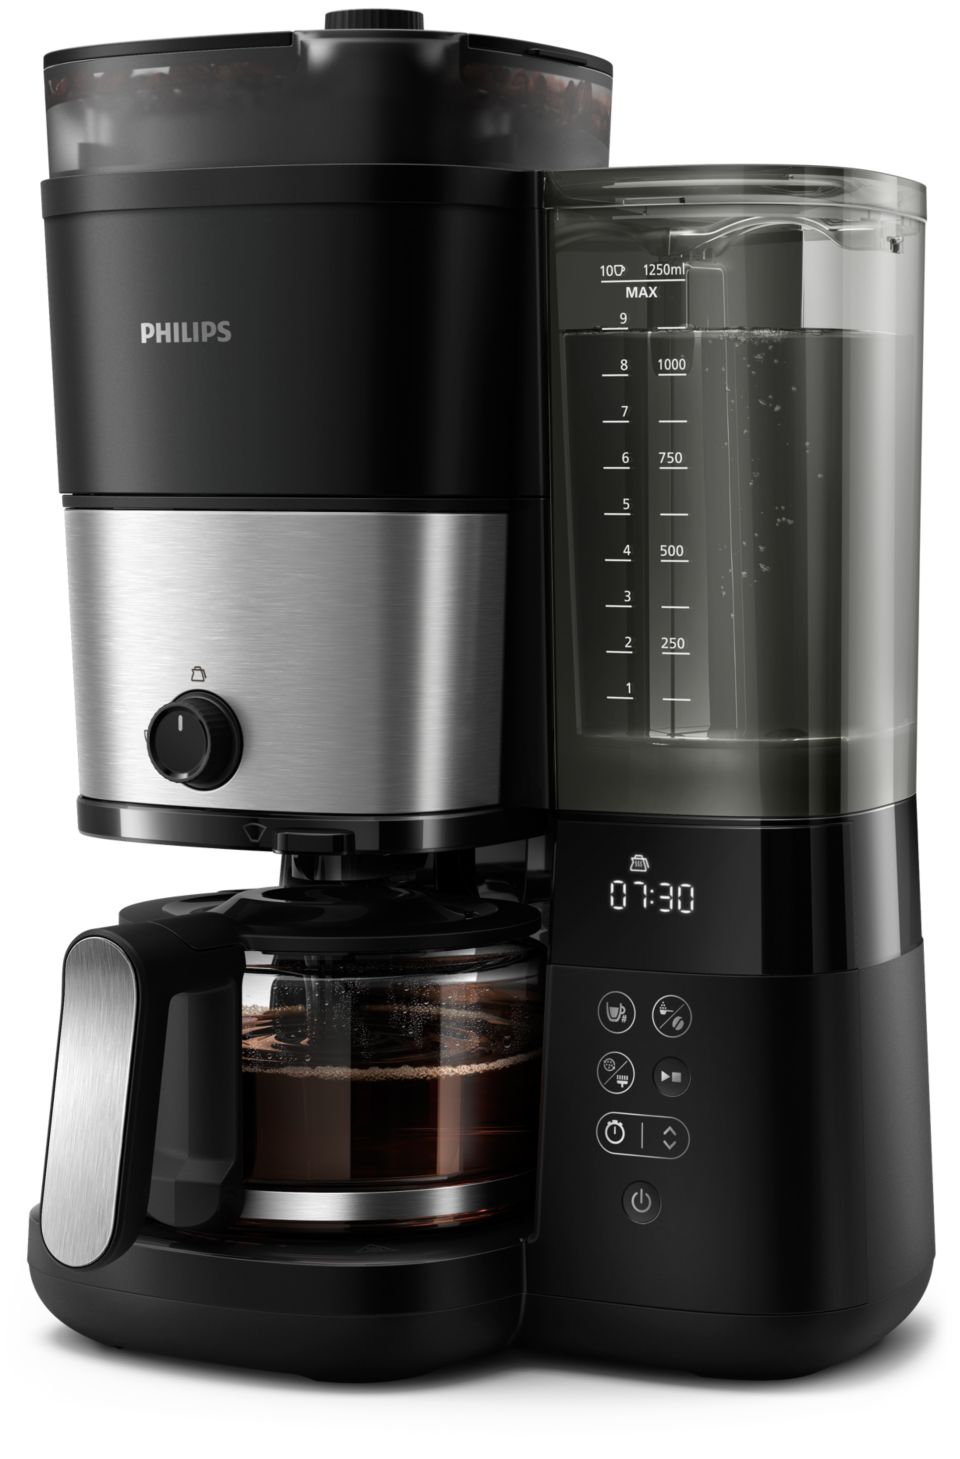 grinder All-in-1 with Brew Philips Drip HD7900/50 maker built-in coffee |